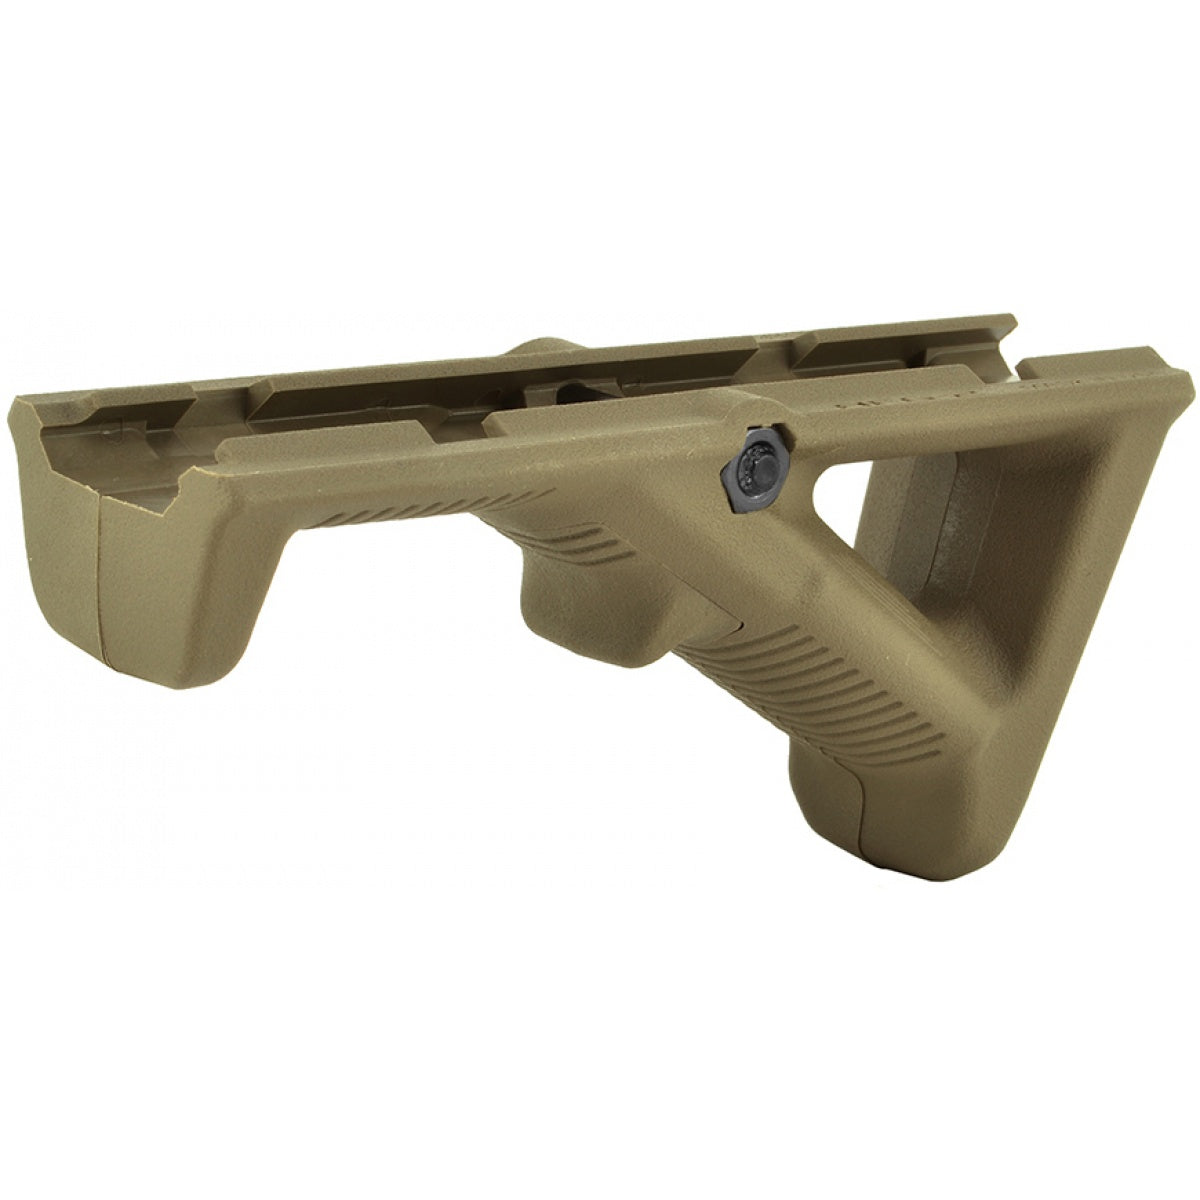 AFG2 Style Angled Foregrip For Picatinny – Tan